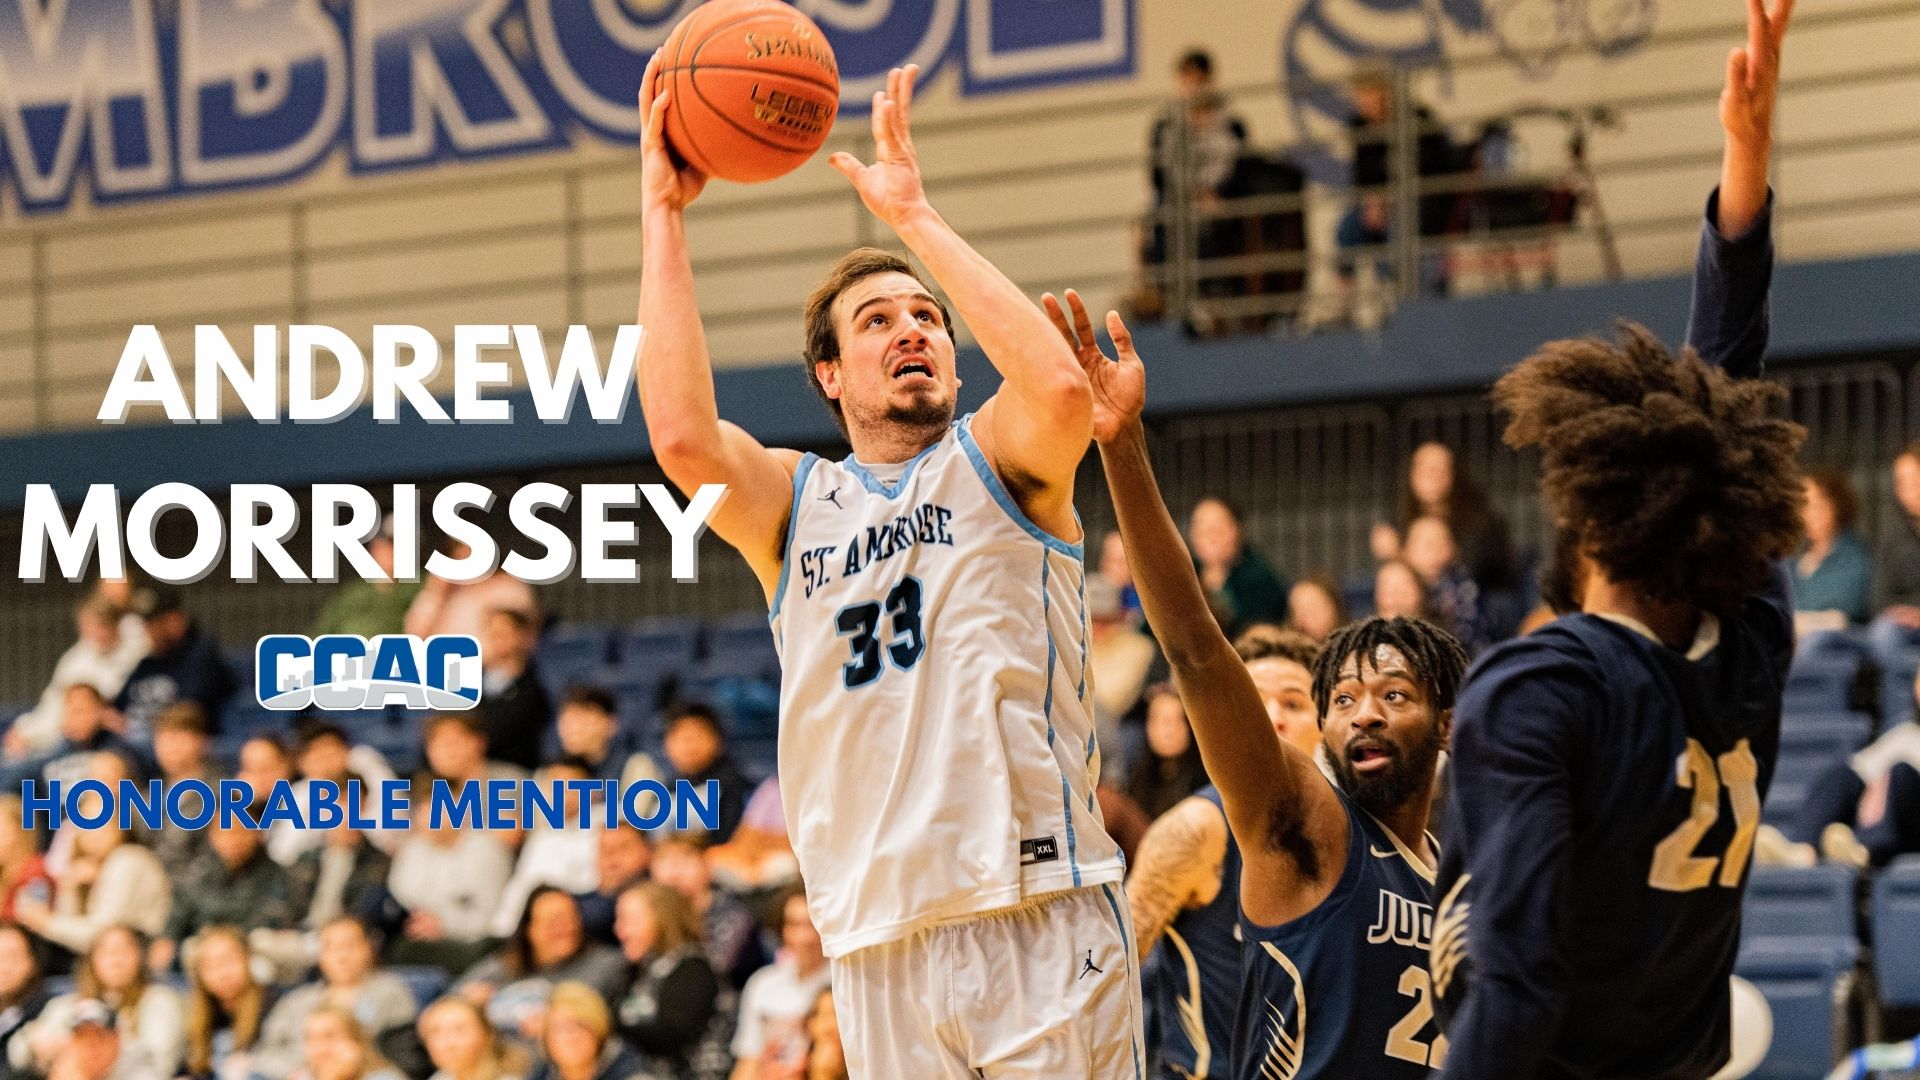 Morrissey earns all-CCAC honorable mention